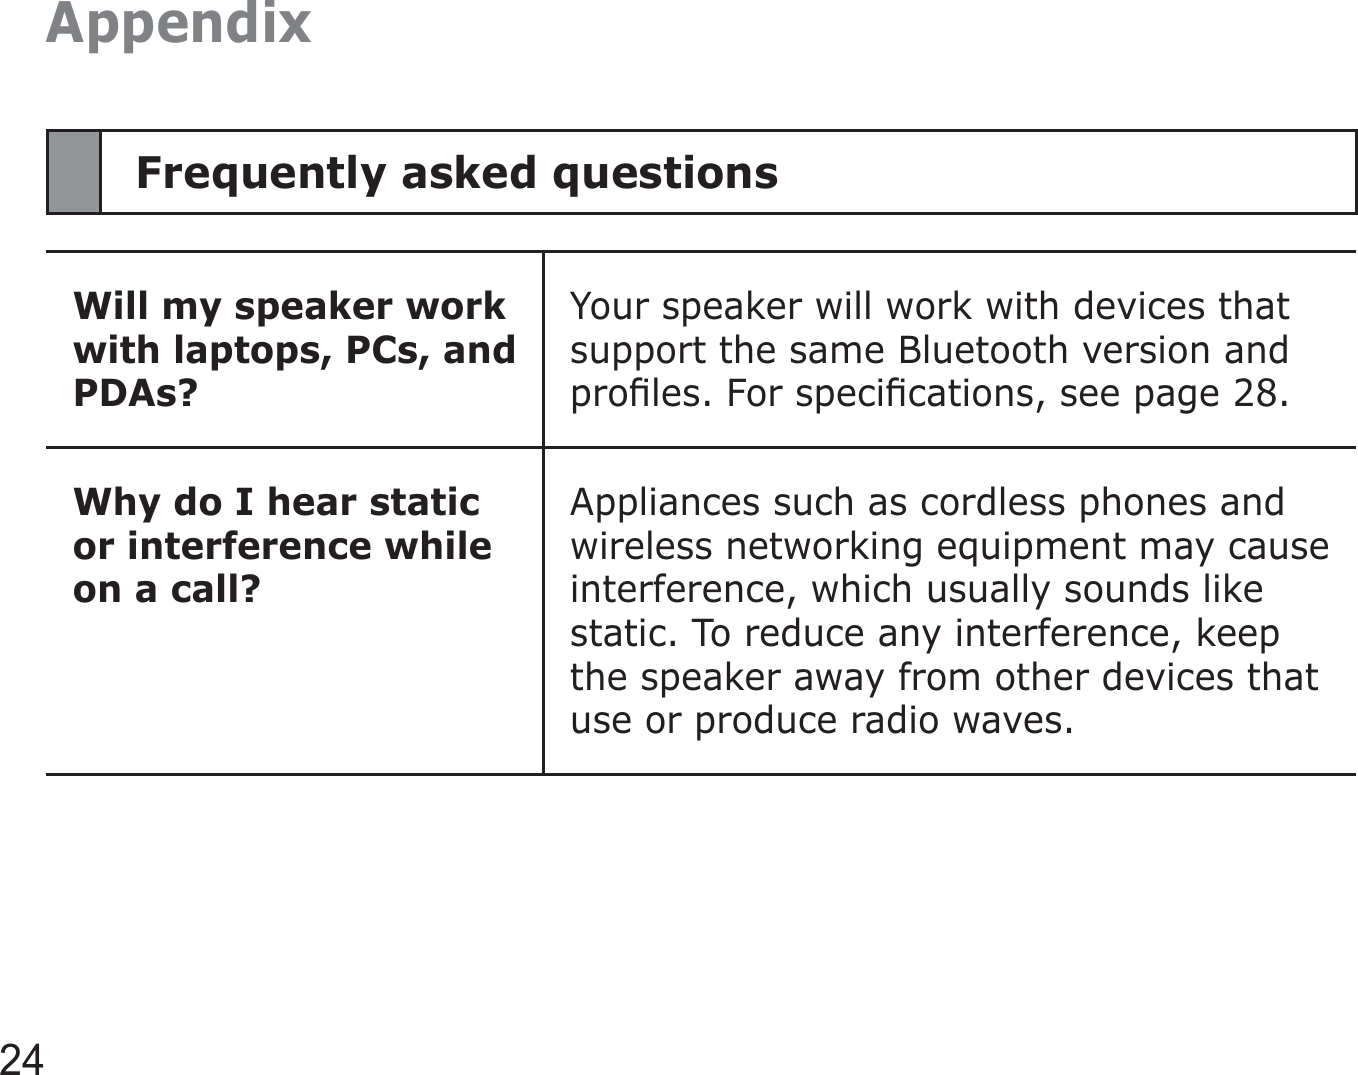 24AppendixFrequently asked questionsWill my speaker work with laptops, PCs, and PDAs?Your speaker will work with devices that support the same Bluetooth version and proﬁles. For speciﬁcations, see page 28.Why do I hear static or interference while on a call?Appliances such as cordless phones and wireless networking equipment may cause interference, which usually sounds like static. To reduce any interference, keep the speaker away from other devices that use or produce radio waves.